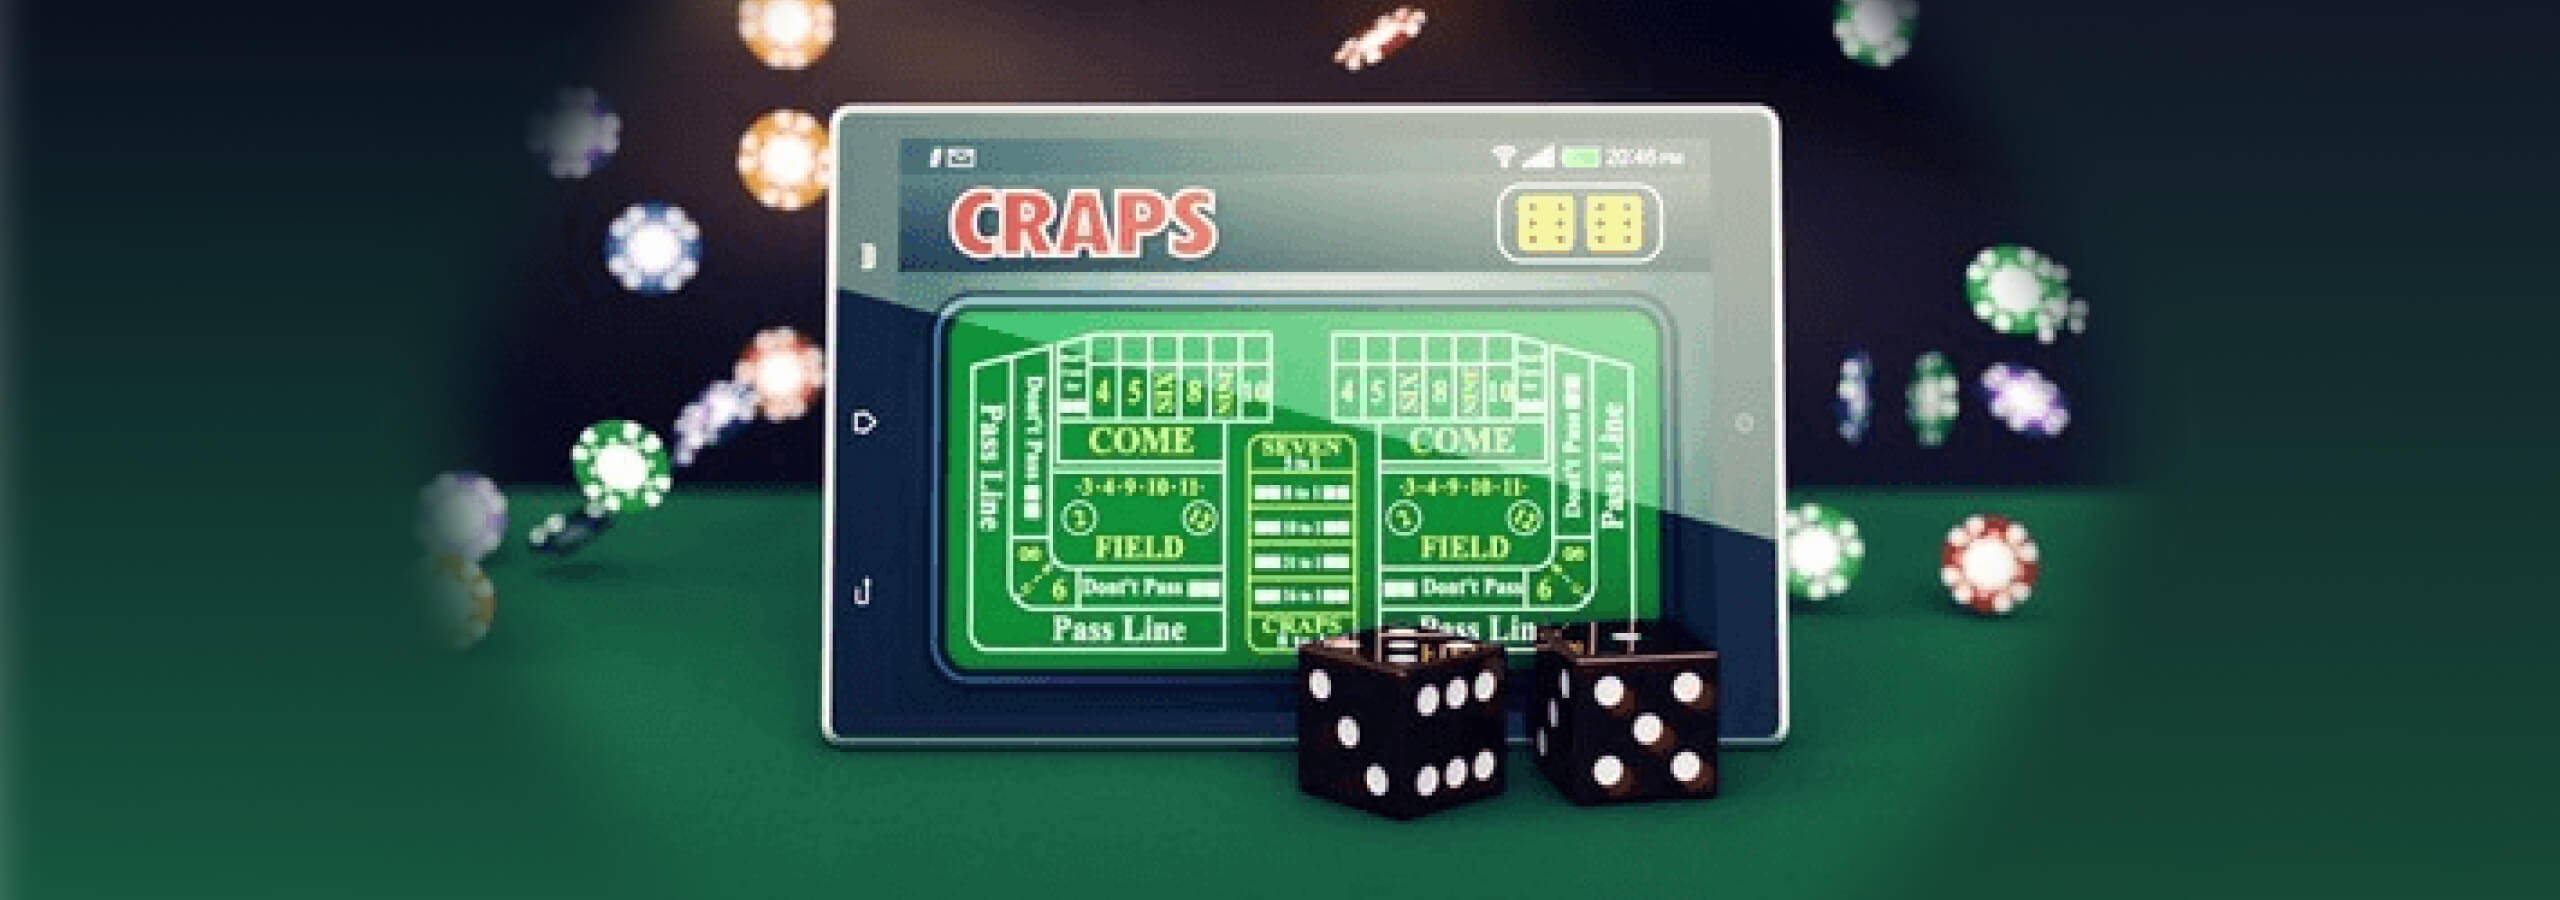 How to Play and Win Online Craps - Full Manual